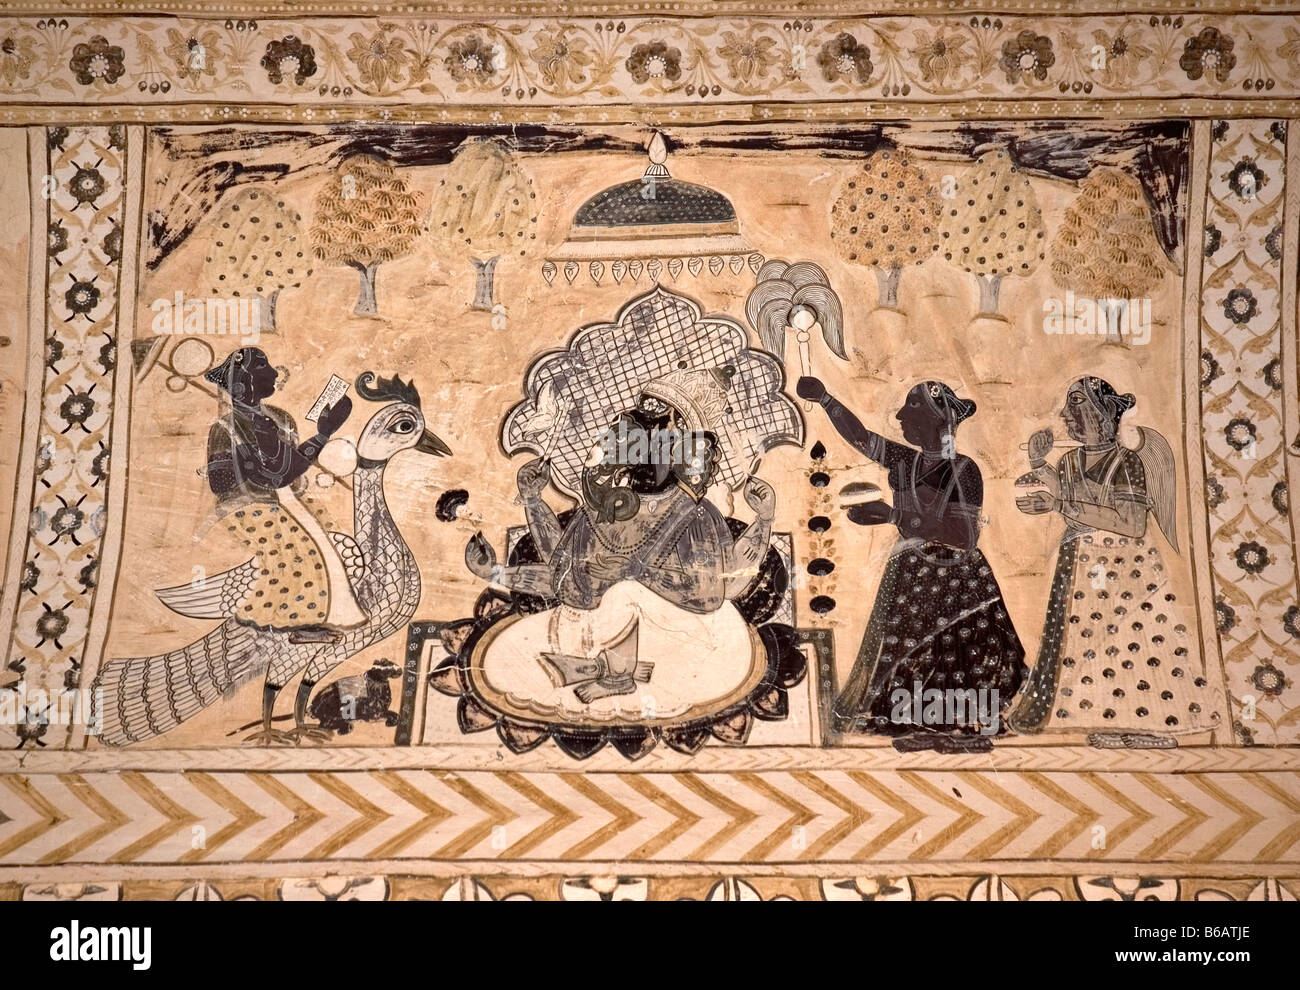 Ancient Murals depicting royal lifestyle, line the walls of the 